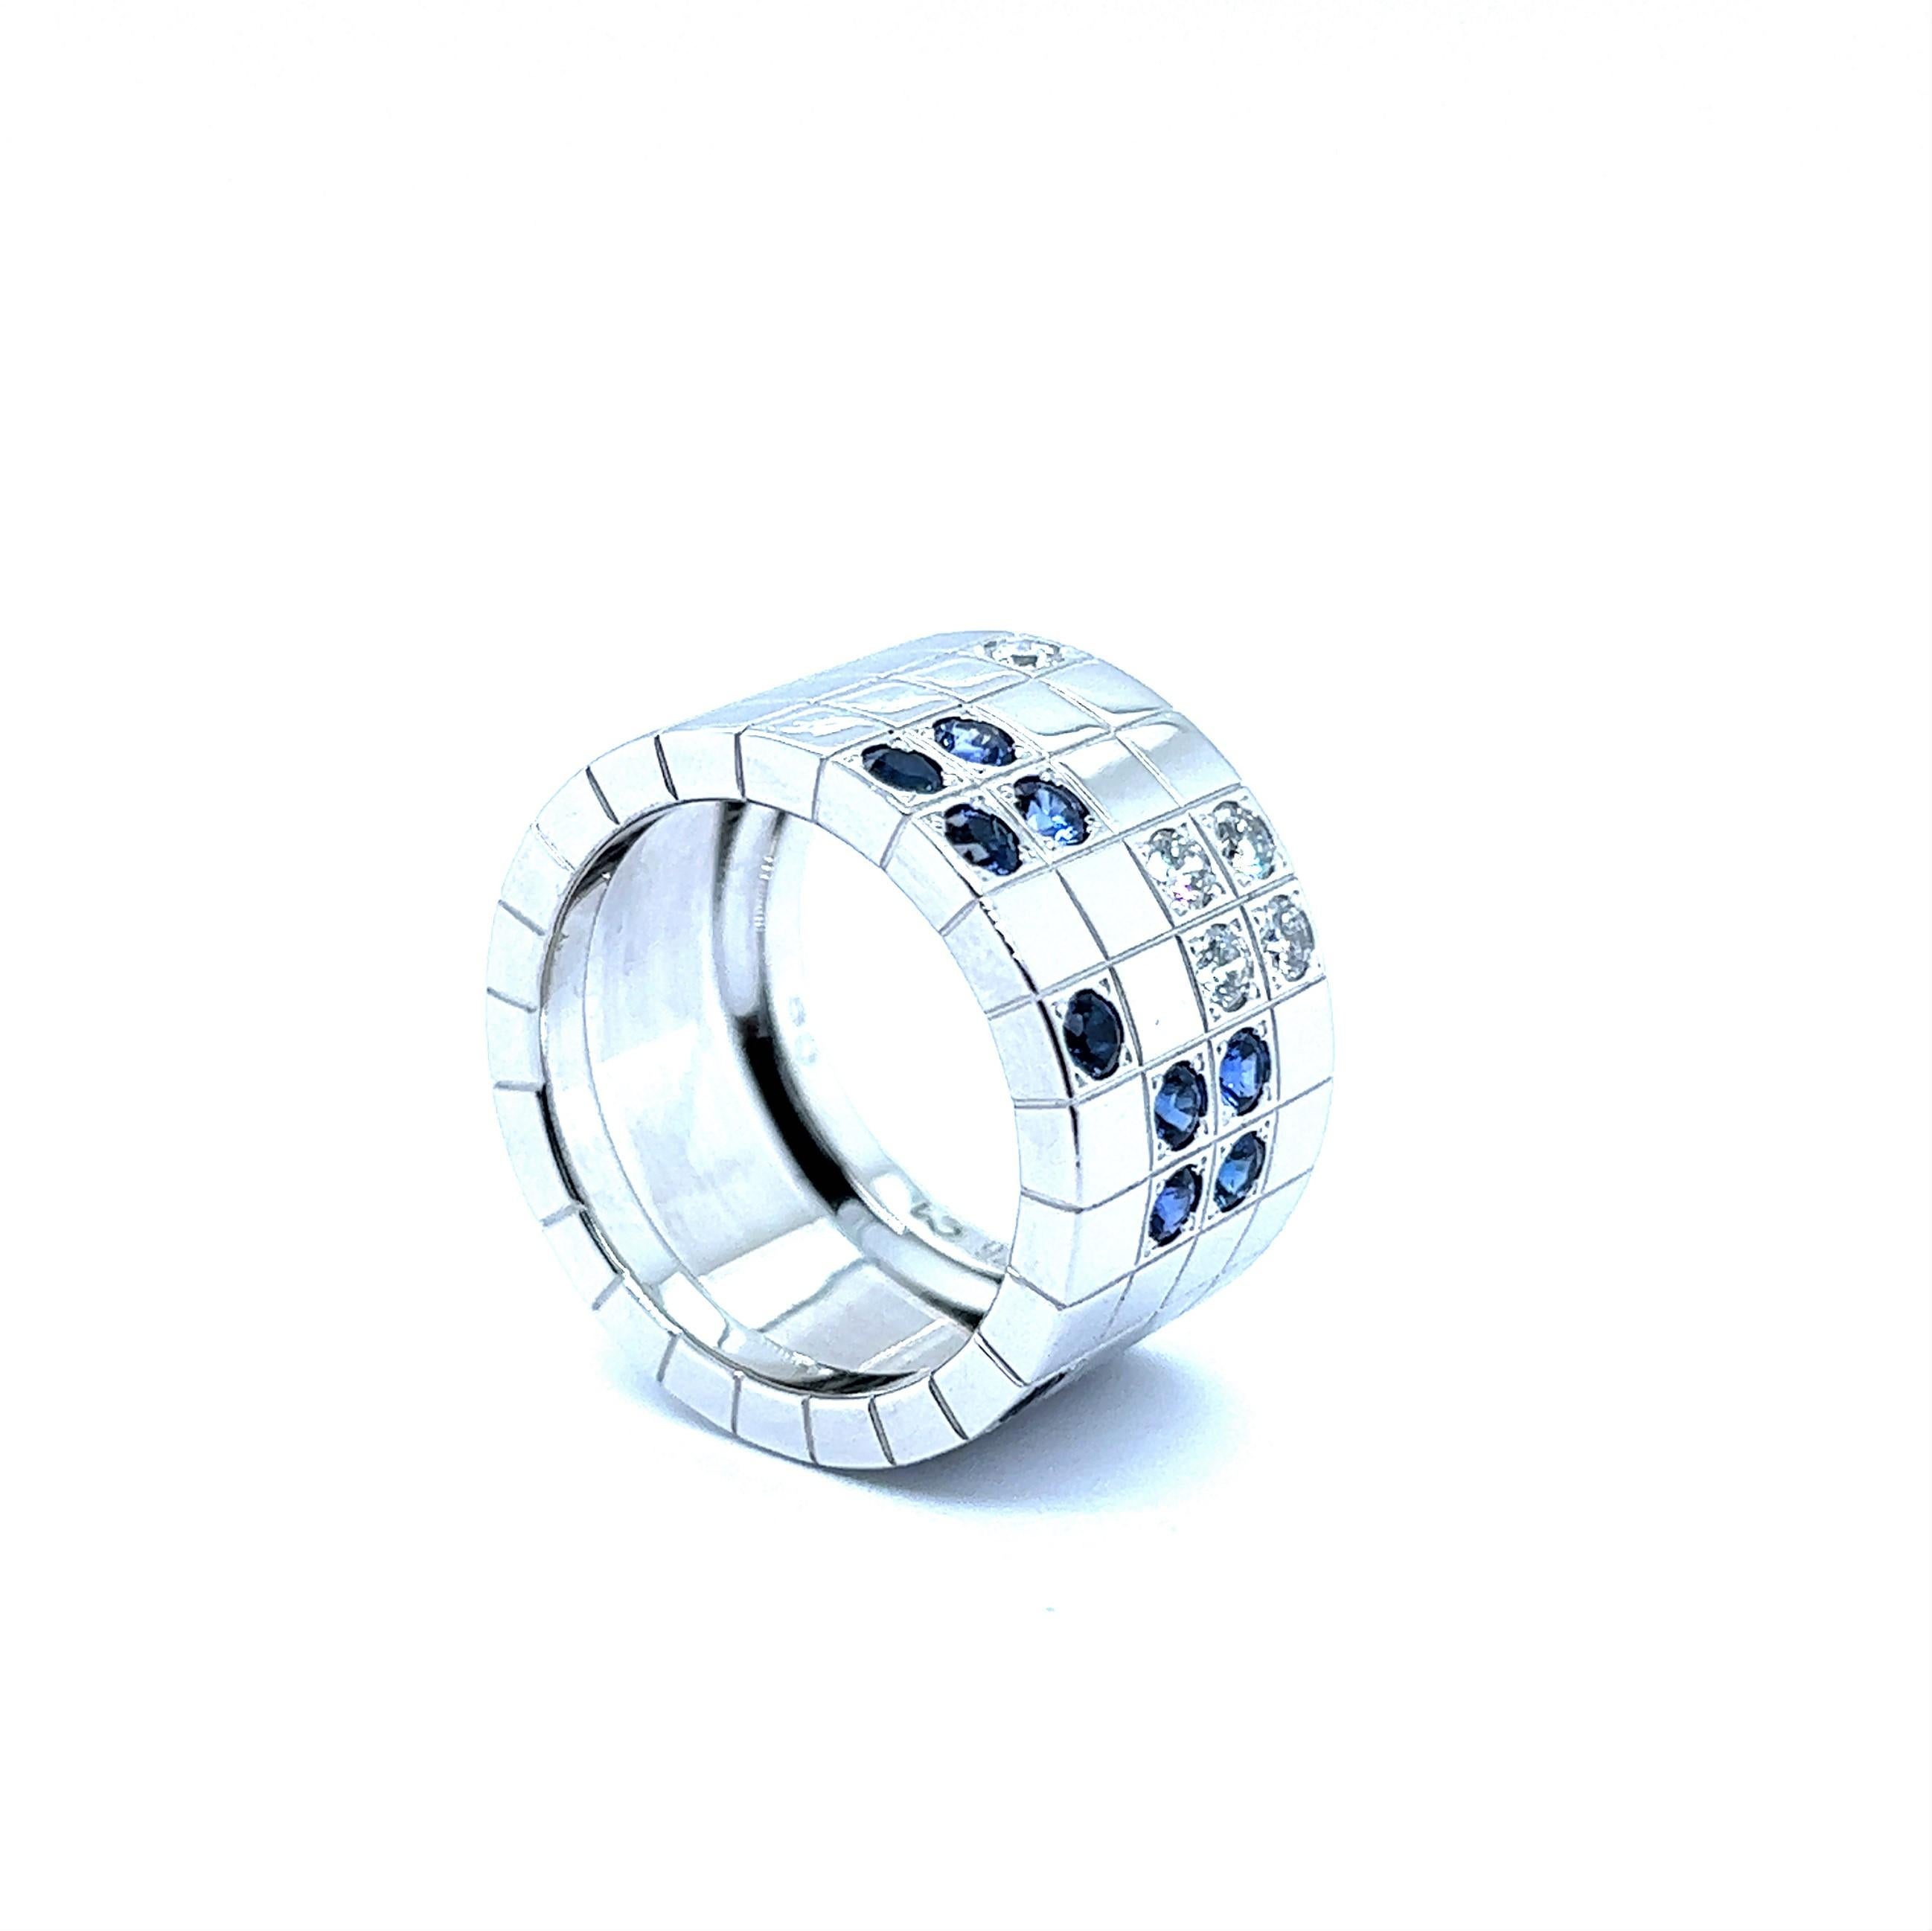 An exceptional ring with sapphires and diamonds from the Lanières collection of the famous Jewelry House Cartier. 

This exquisite piece is designed with a stylish geometric pattern in solid 18 Karat white gold for a sleek and contemporary look.